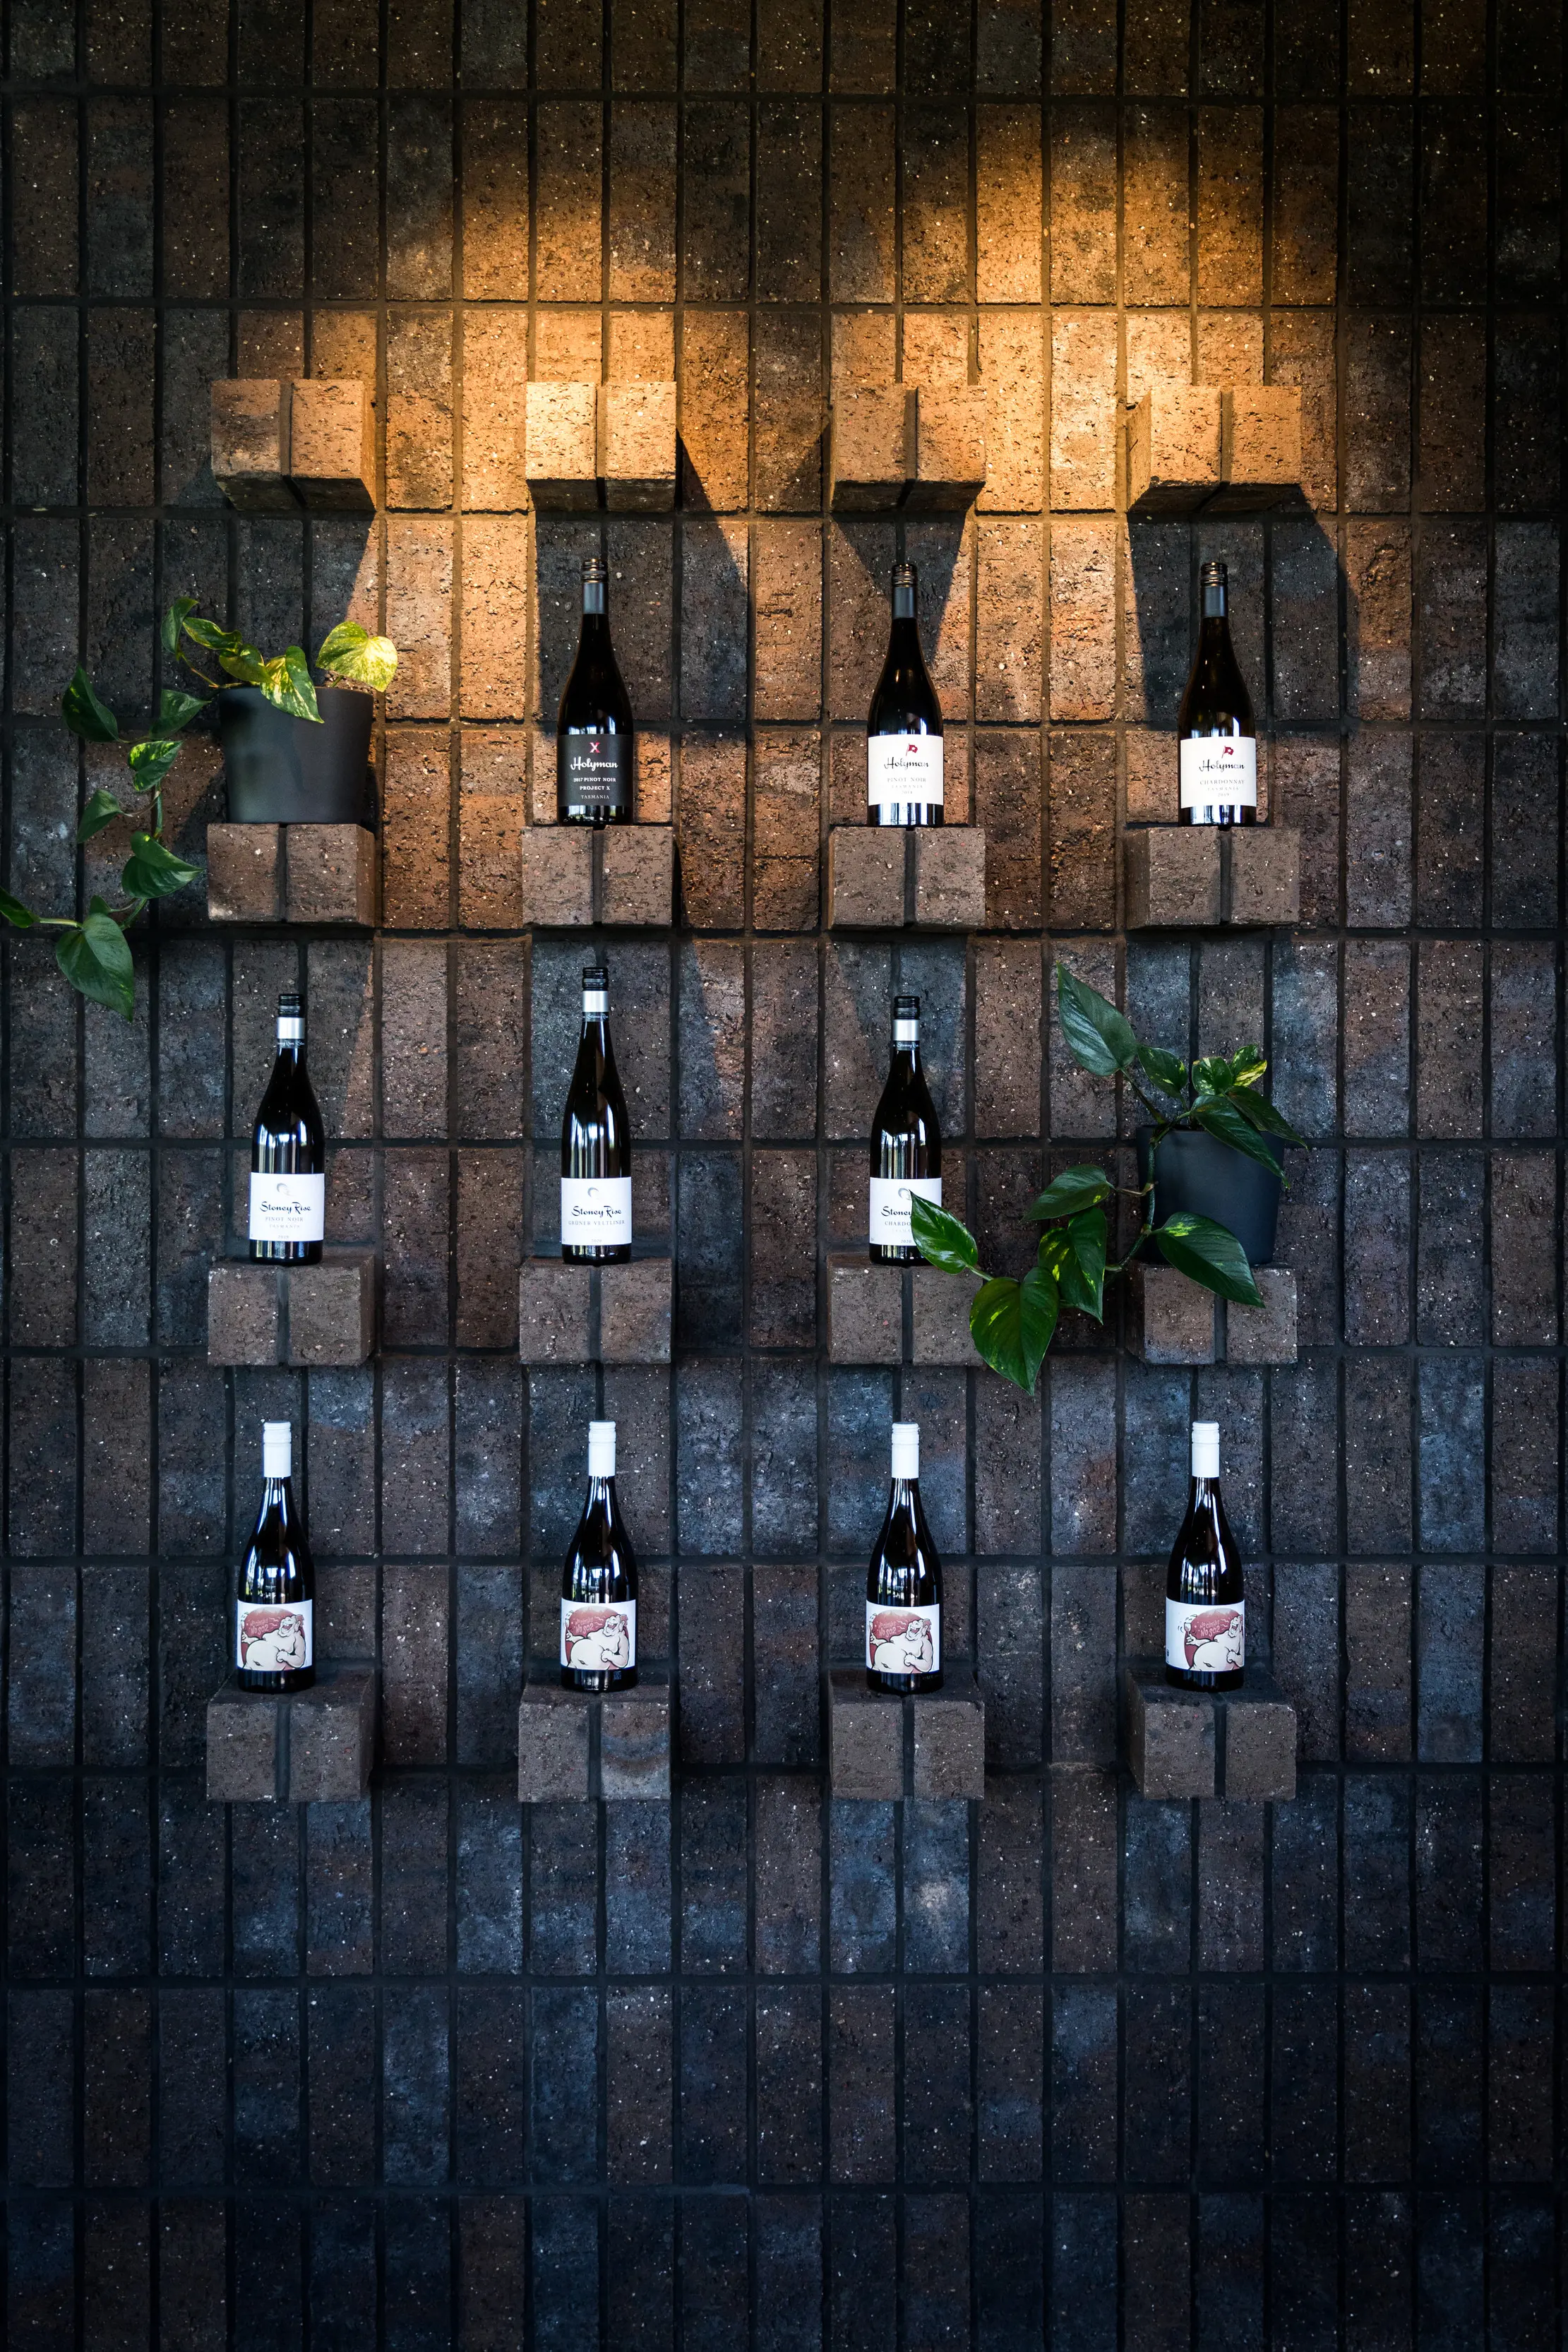 An indoor lit wall featuring shelves of wine and plants at Stoney Rise Wine Company.